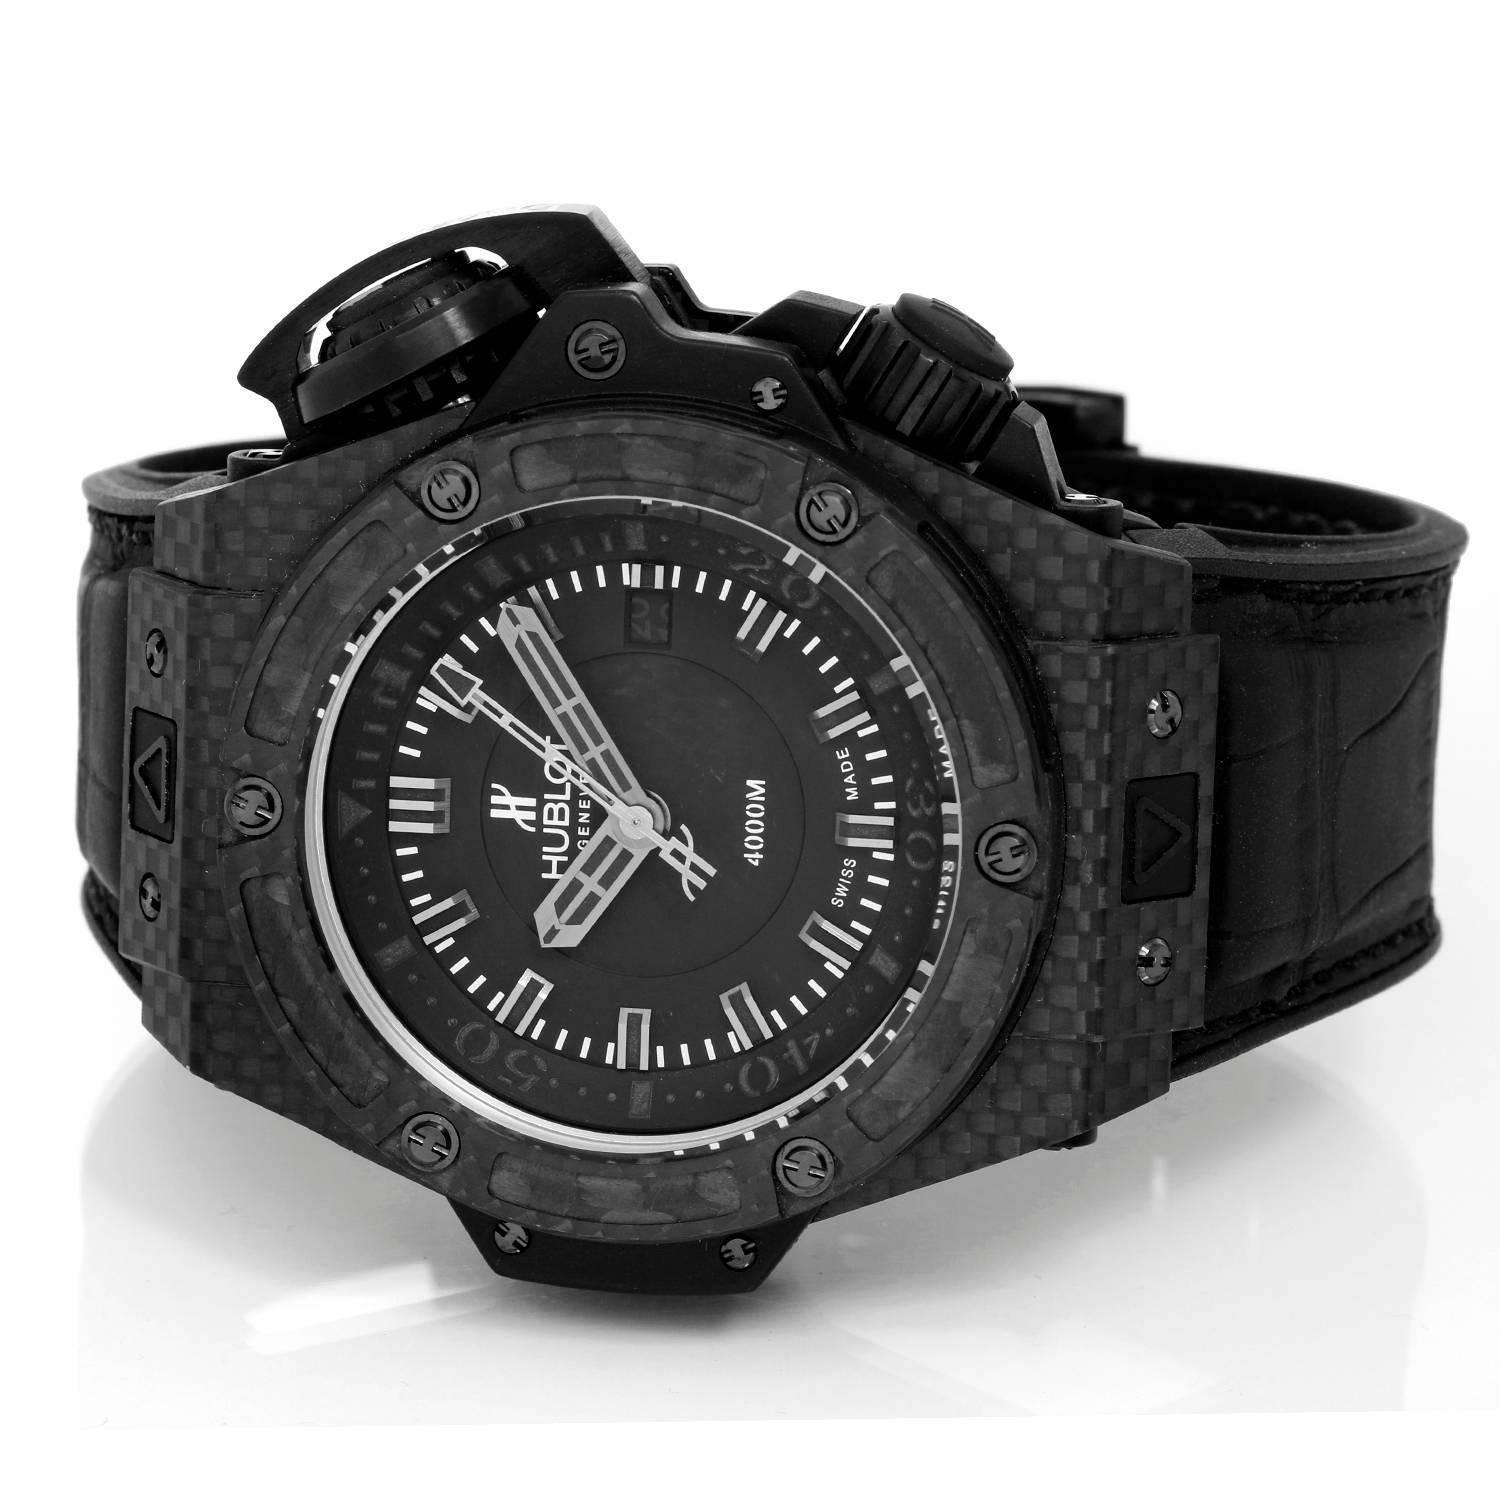 Hublot Oceanographic 4000 Carbon Fiber Men's Watch -  Automatic. Carbon Fiber case with inner rotating bezel ( 48 mm ). Black Matte dial with hour markers. Black alligator pattern strap with black Titanium Hublot buckle. Pre-owned with Hublot box